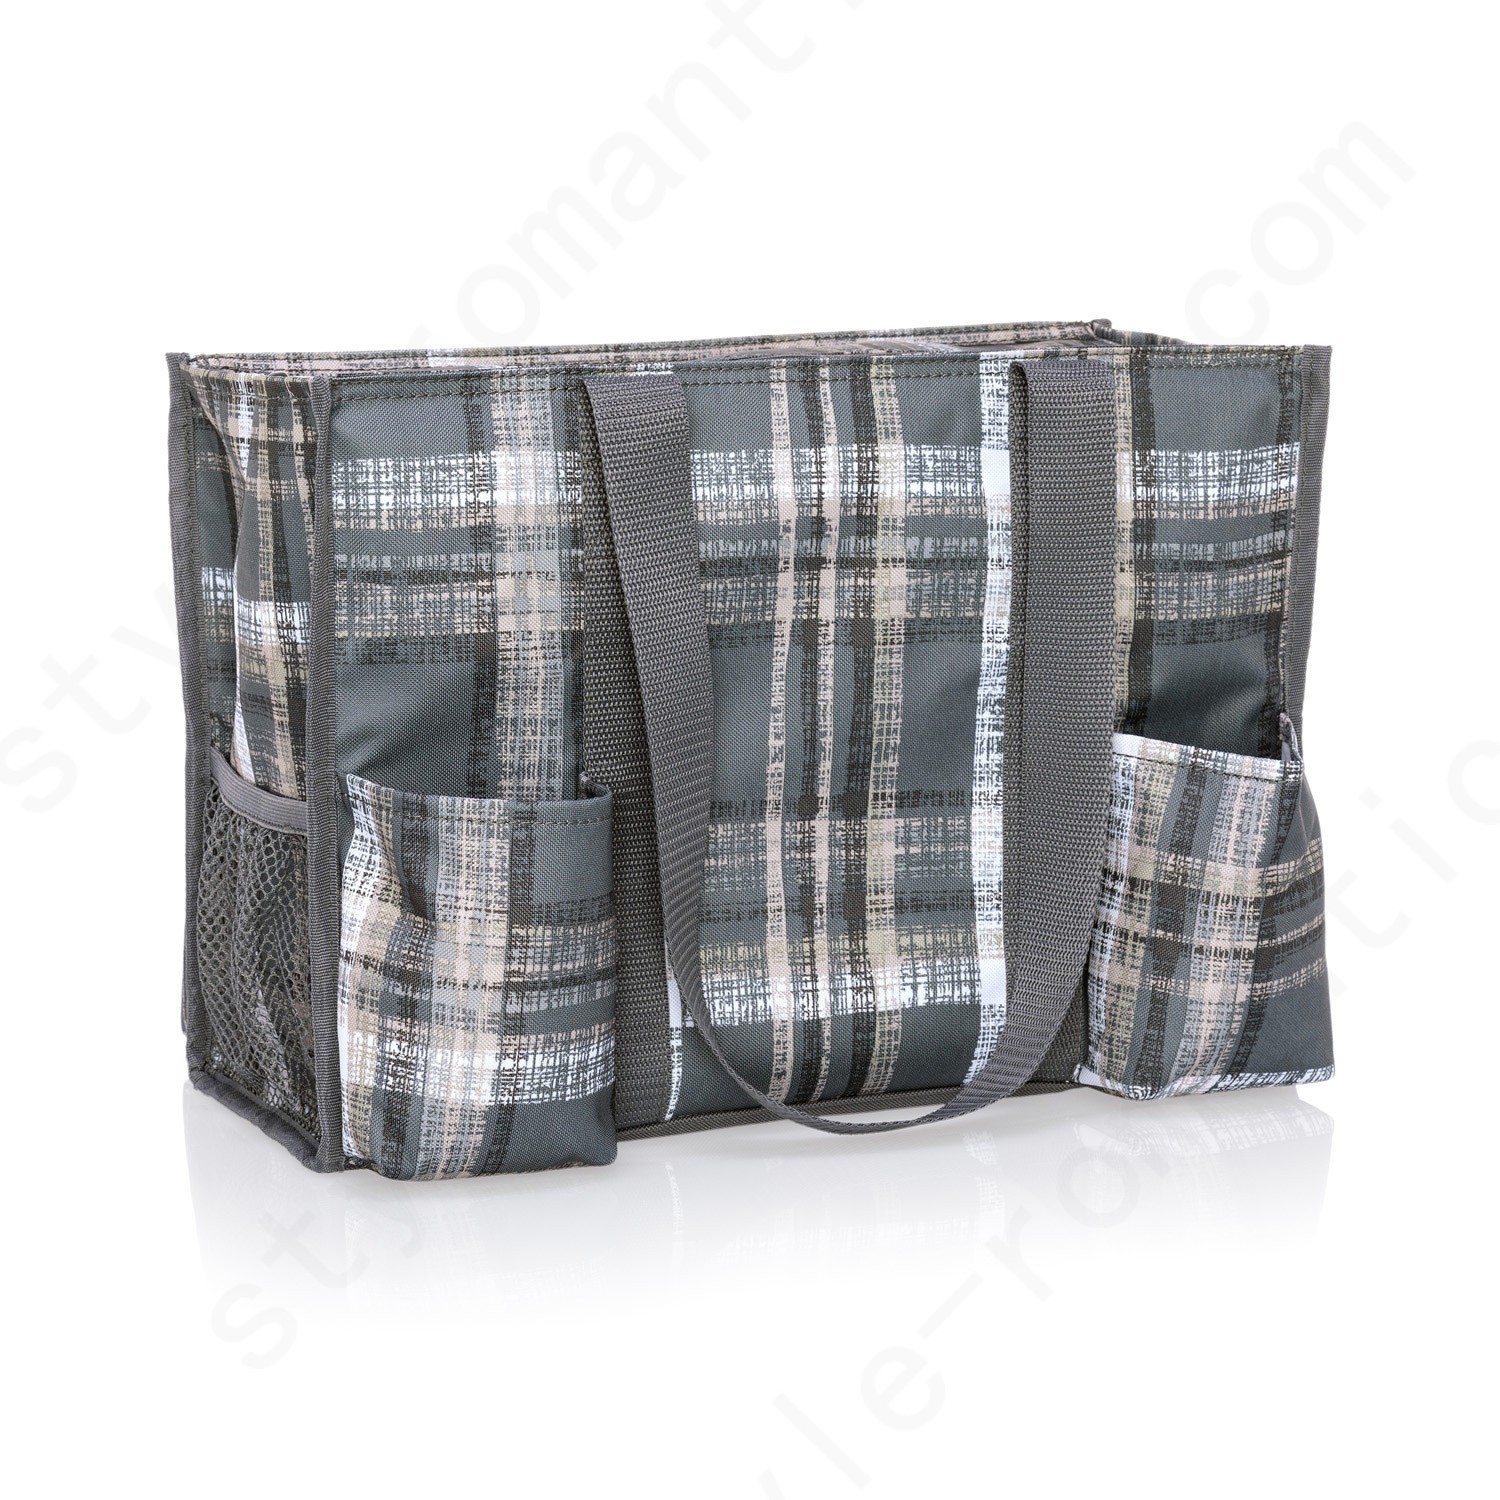 Thirty-One Gifts Zip-Top Organizing Utility Tote - Cozy Plaid - Thirty-One Gifts Zip-Top Organizing Utility Tote - Cozy Plaid